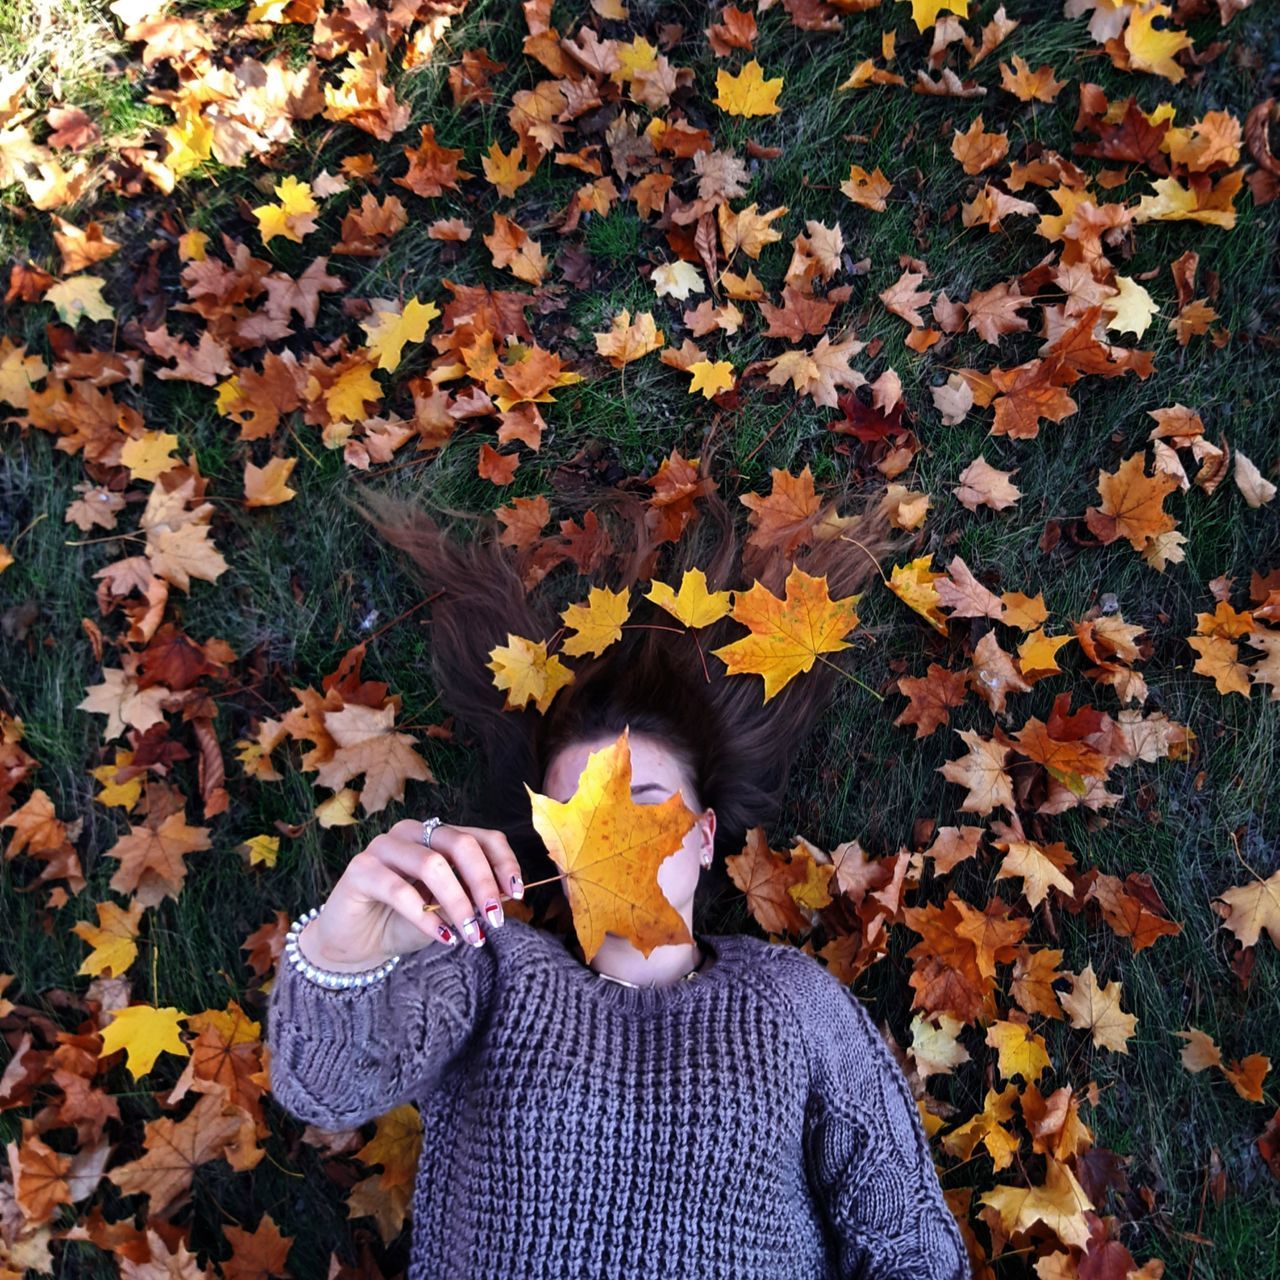 autumn, plant part, leaf, one person, change, real people, unrecognizable person, leaves, leisure activity, nature, maple leaf, lifestyles, day, obscured face, human body part, front view, casual clothing, vulnerability, covering, body part, outdoors, human face, finger